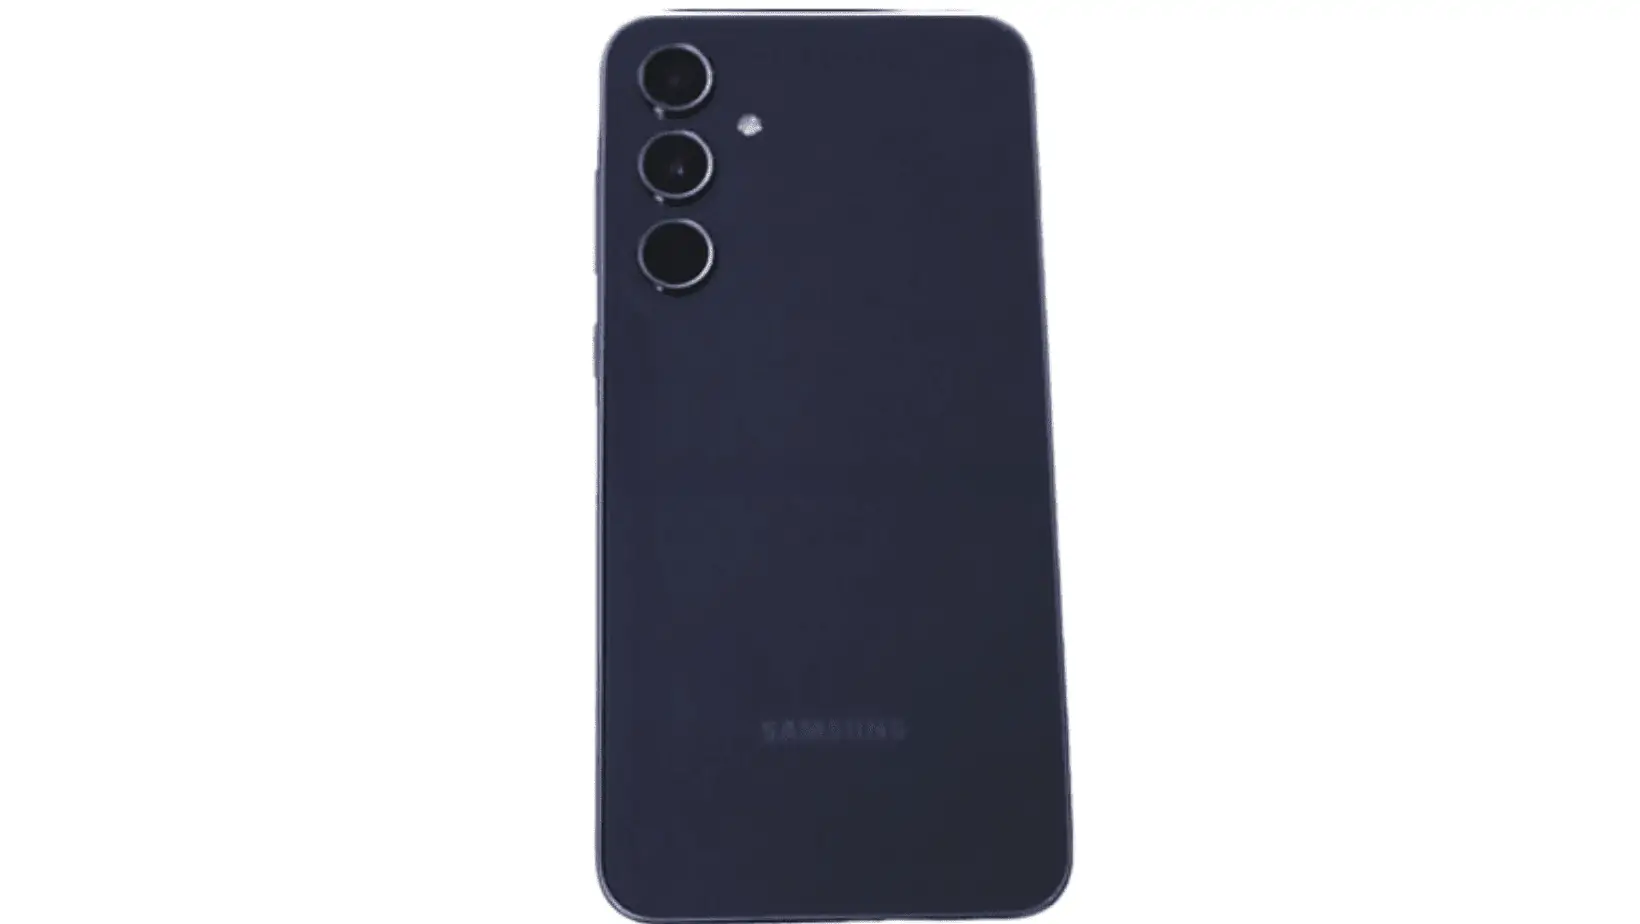 Samsung Galaxy A35 Leaks: Design and Specifications Revealed Ahead of Official Announcement